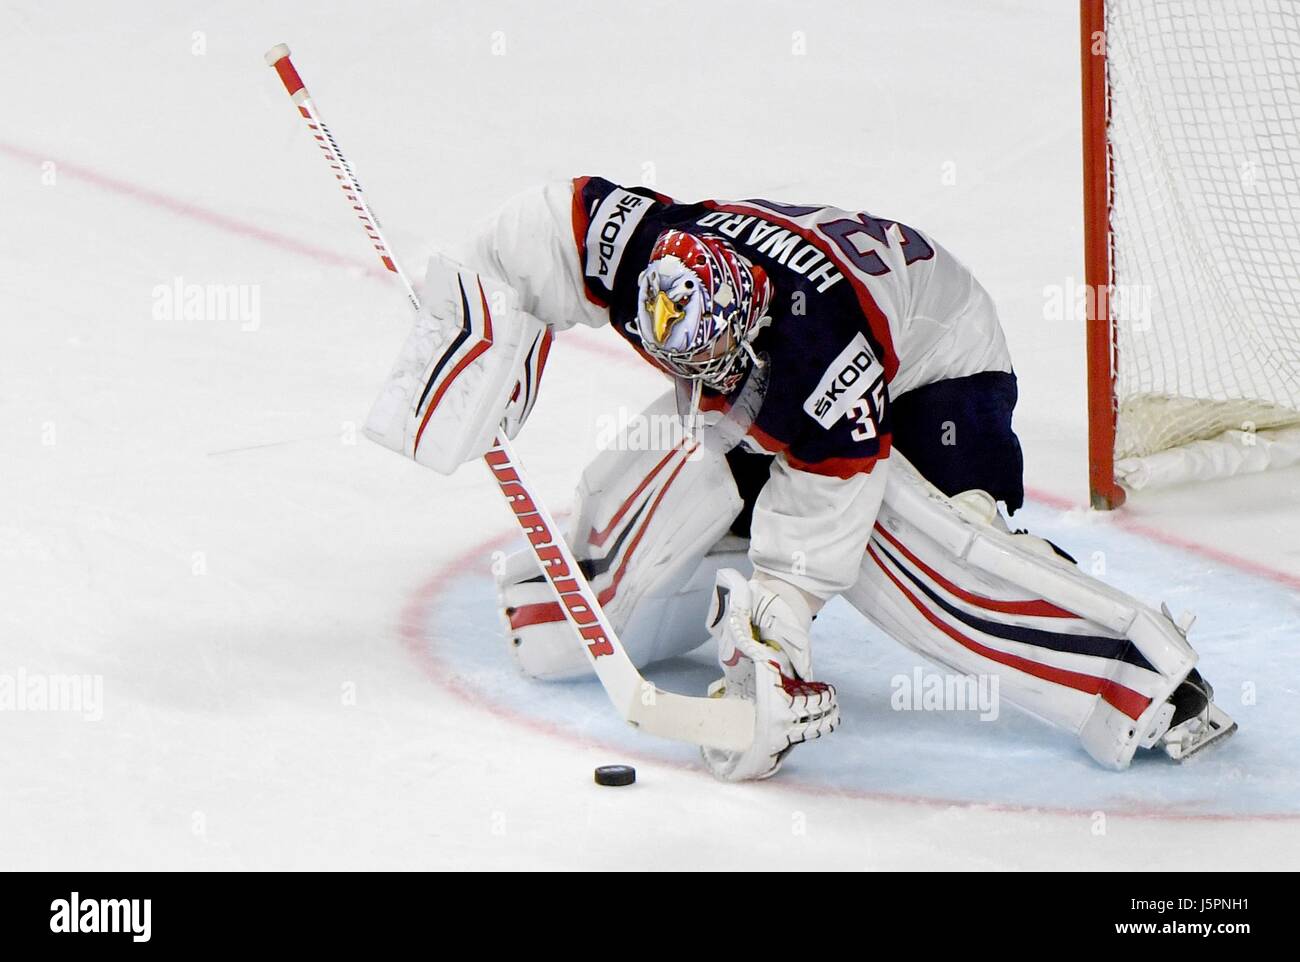 Cologne, Germany. 18th May, 2017. American goalkeeper Jimmy Howard catches the puck during the Ice Hockey World Championship quarter-final match between the US and Finland in the Lanxess Arena in Cologne, Germany, 18 May 2017. Photo: Monika Skolimowska/dpa/Alamy Live News Stock Photo